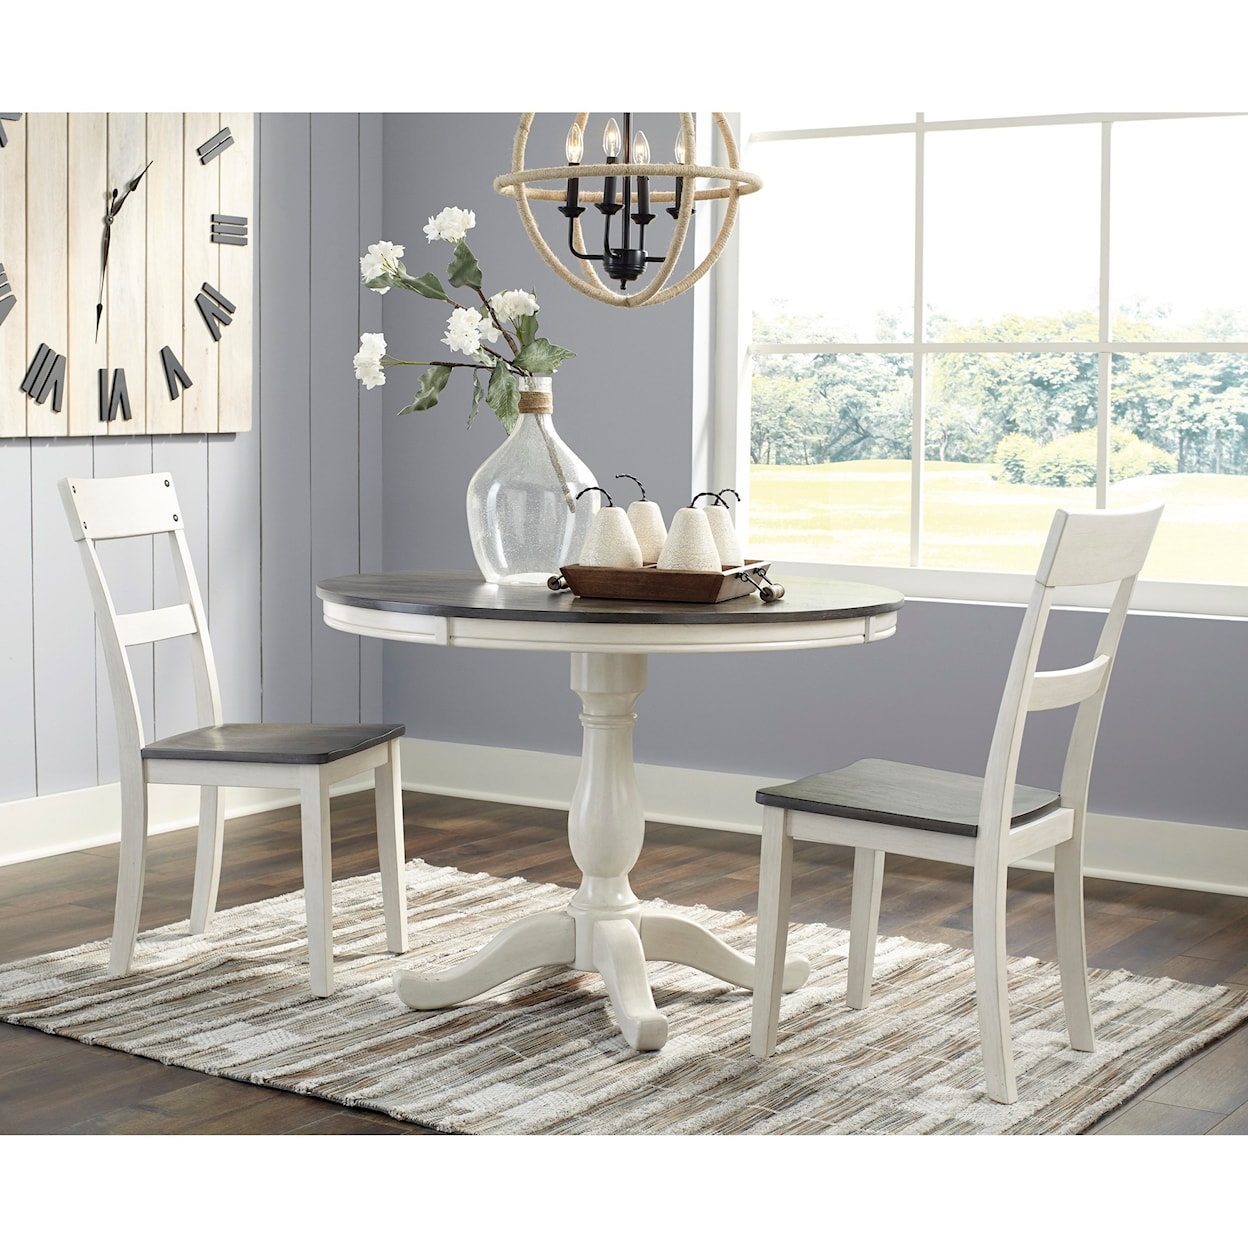 Ashley Furniture Signature Design Nelling Dining Room Table